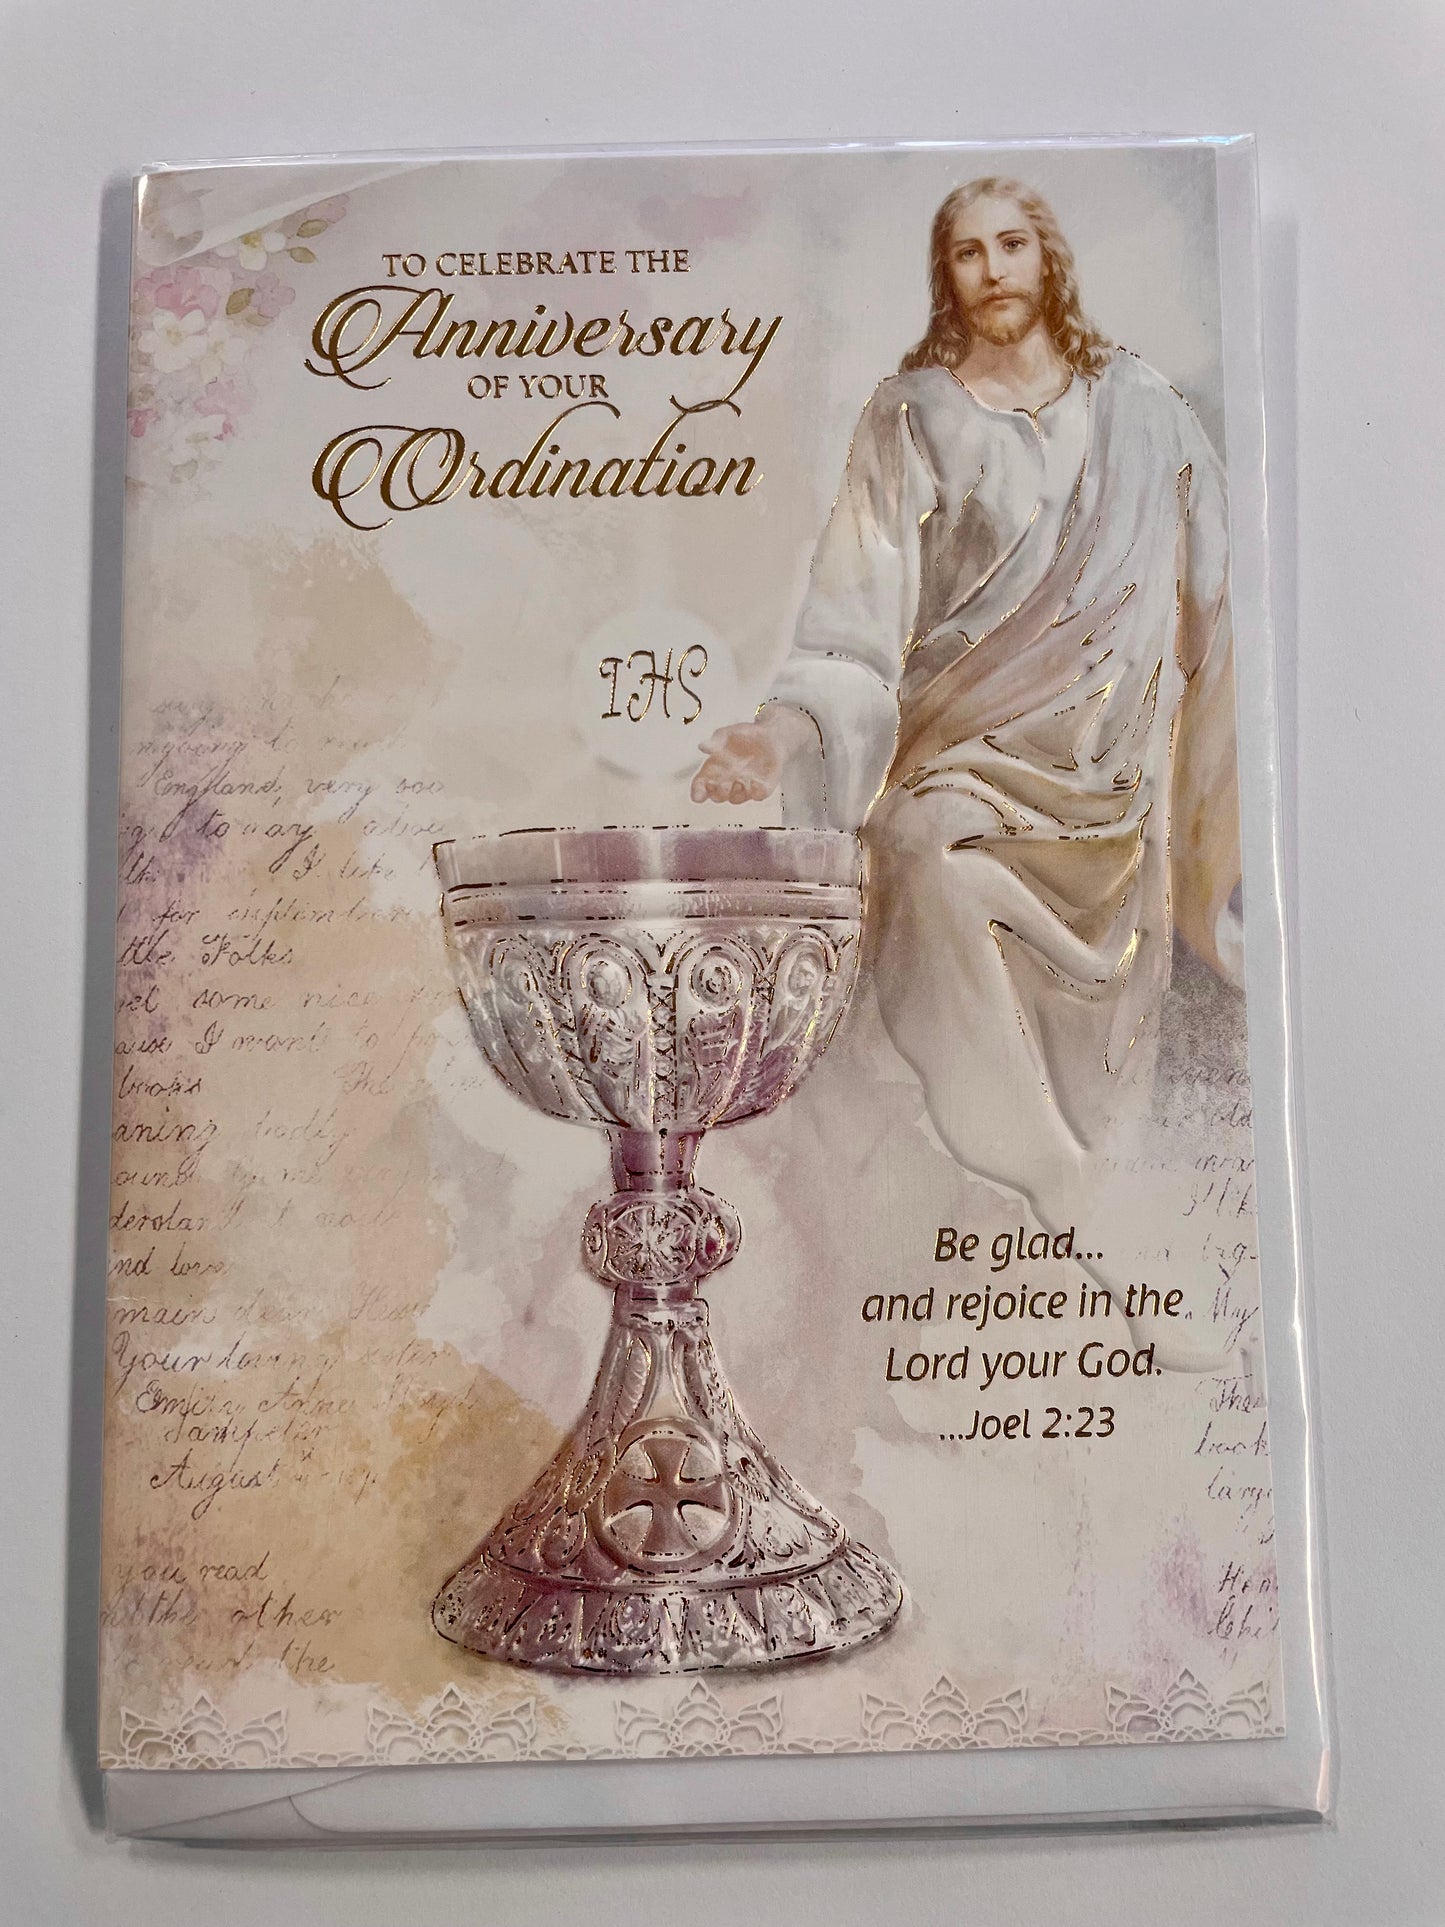 Card: To Celebrate the Anniversary of your Ordination